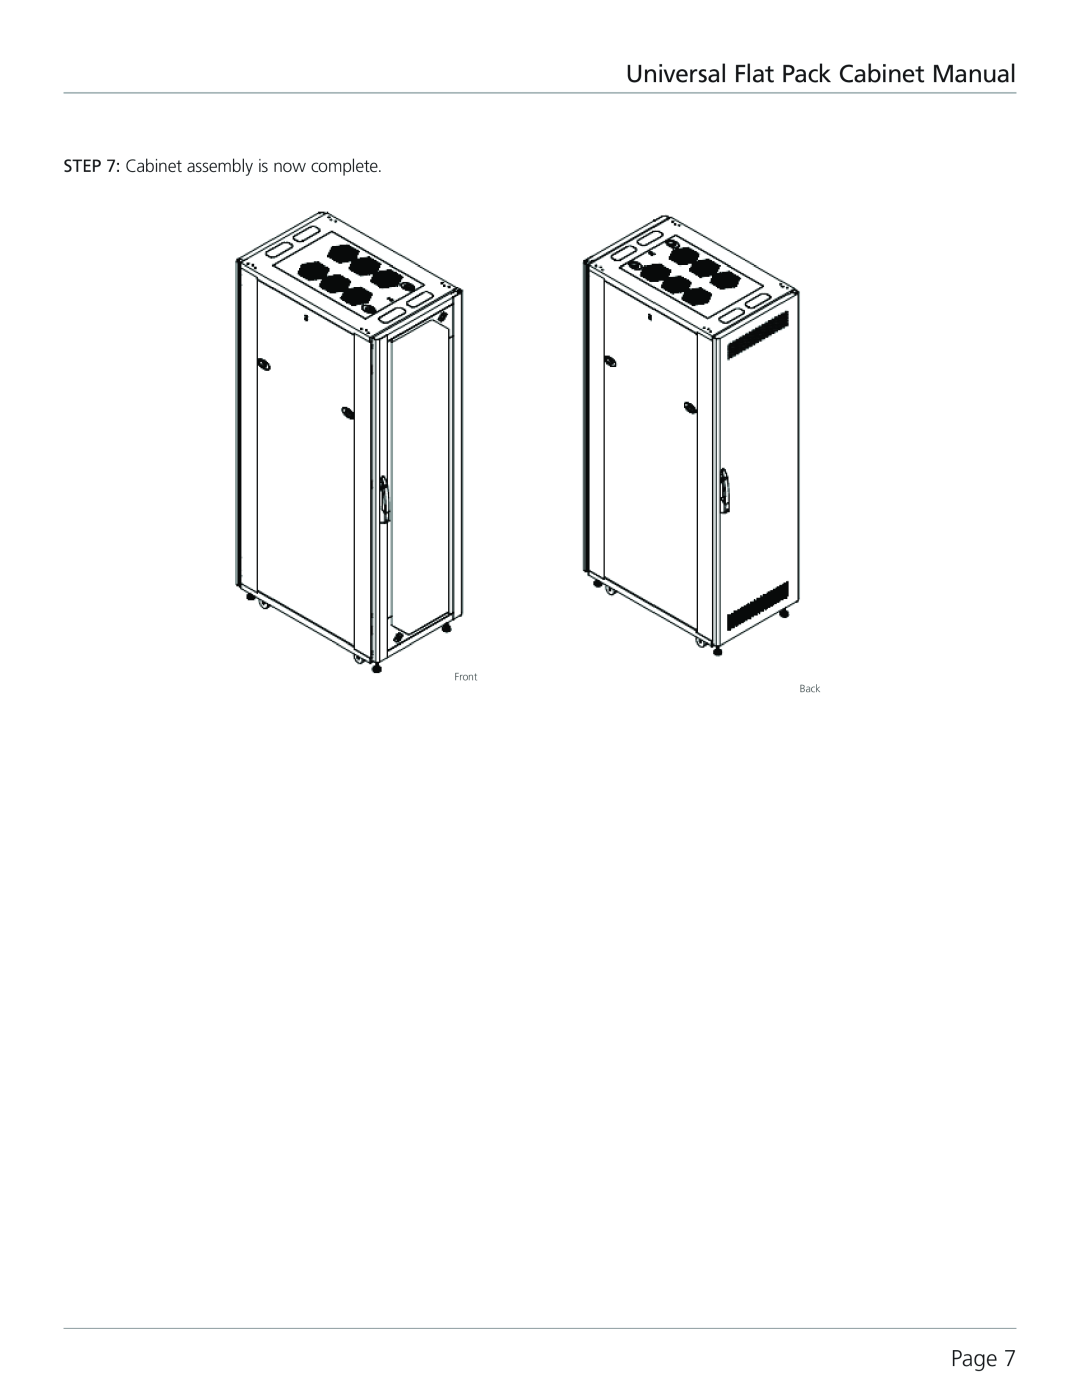 Black Box RMT3200A-R2 manual Universal Flat Pack Cabinet Manual, Page, Cabinet assembly is now complete, Front Back 